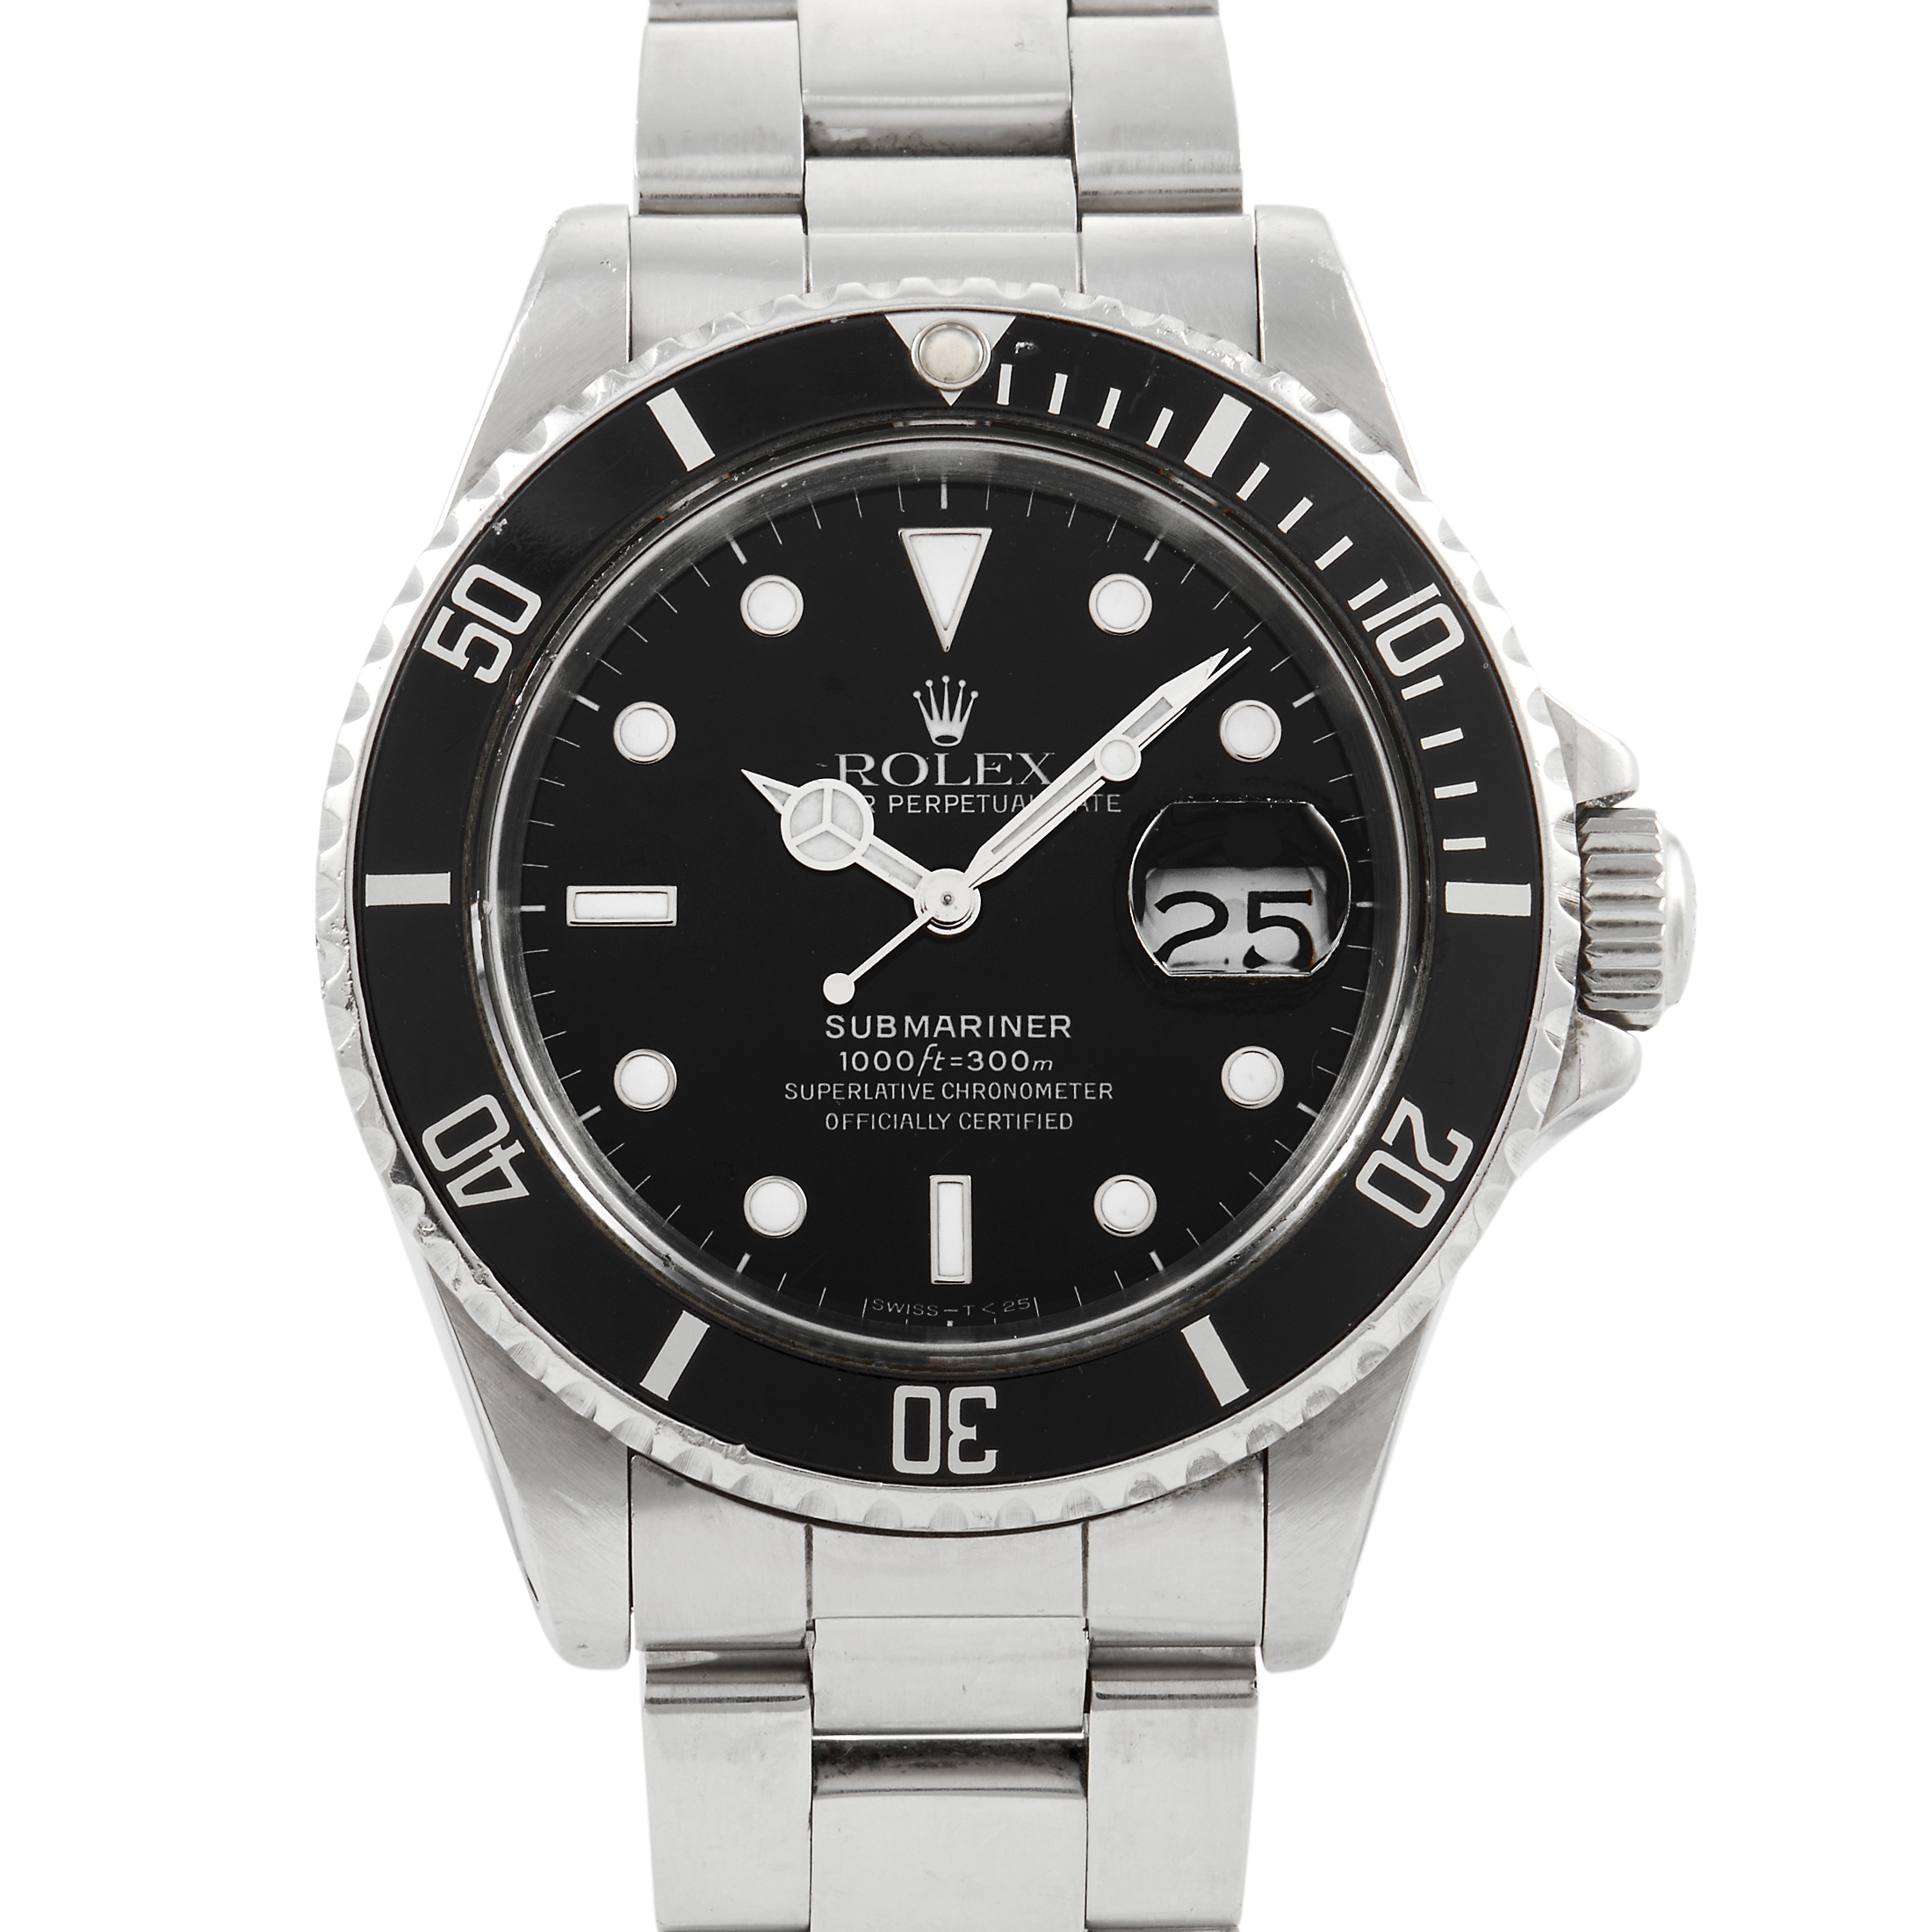 Rolex Submariner Black Dial Watch 16610BKSO